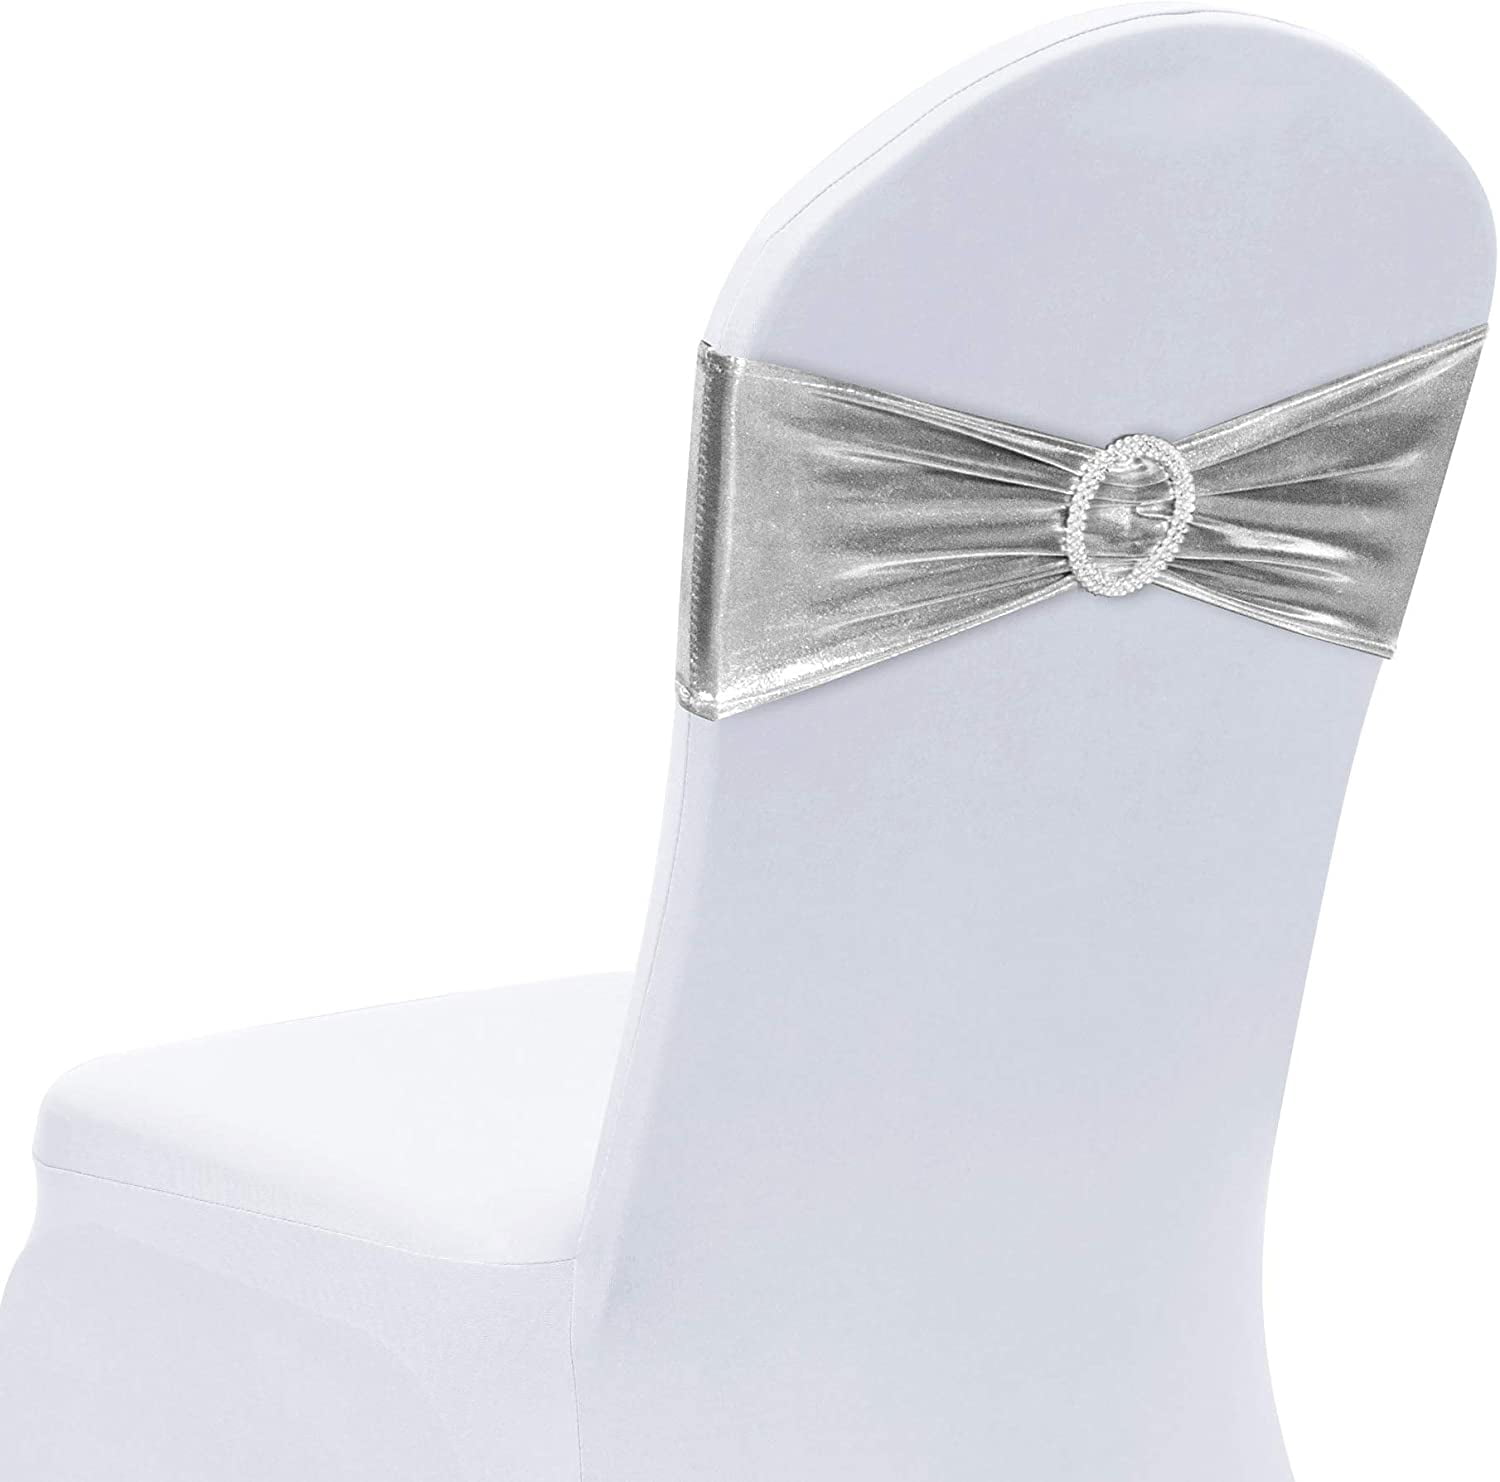 50pcs Spandex Stretch Wedding Party Chair Cover Band Sashes w/Buckle Bow Slider 